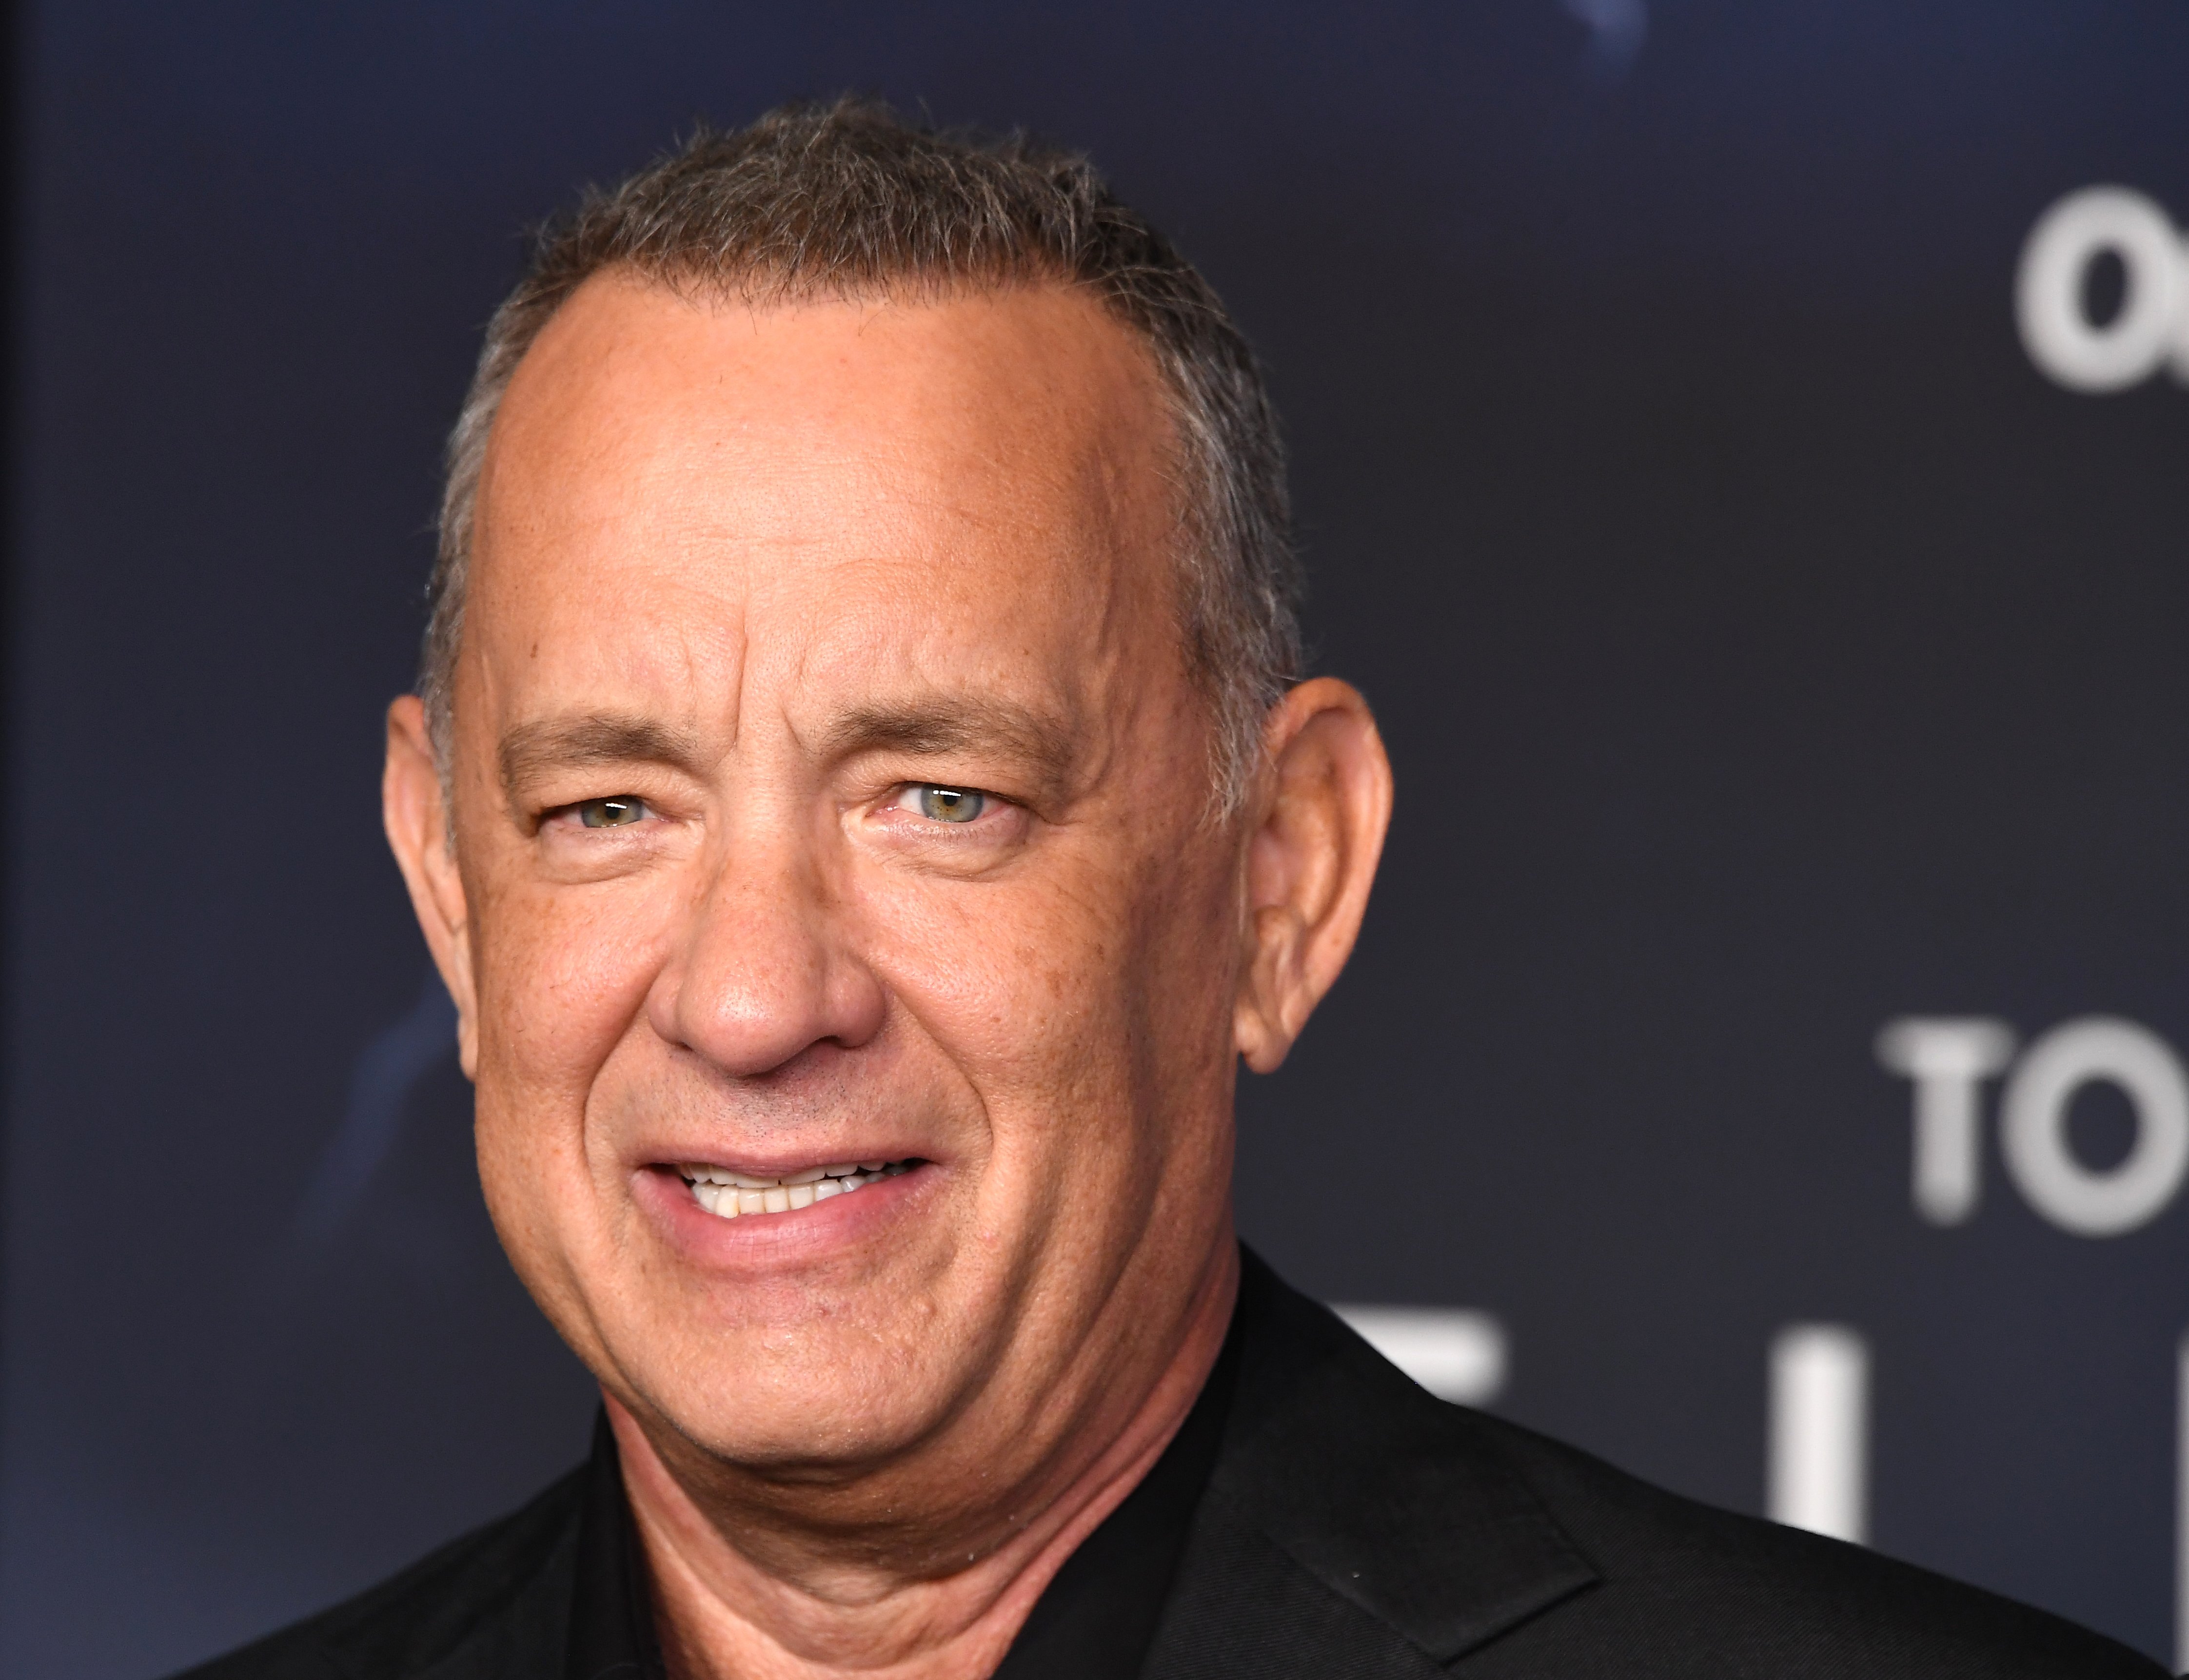 Tom Hanks at Pacific Design Center on November 02, 2021. | Source: Getty Images